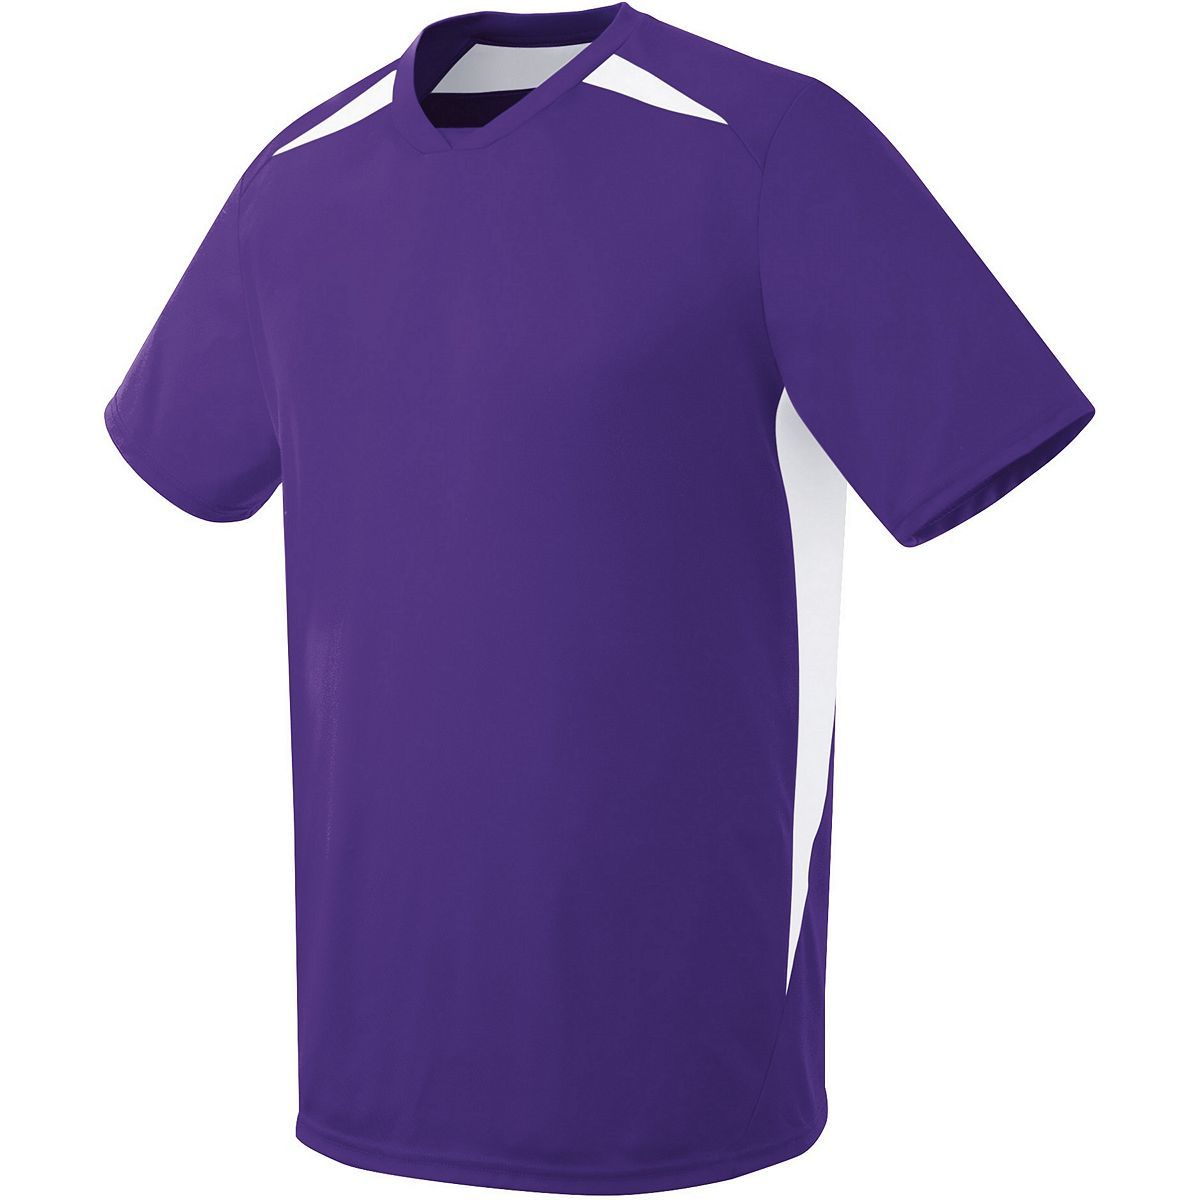 High 5 Adult Hawk Jersey in Purple/White  -Part of the Adult, Adult-Jersey, High5-Products, Soccer, Shirts, All-Sports-1 product lines at KanaleyCreations.com